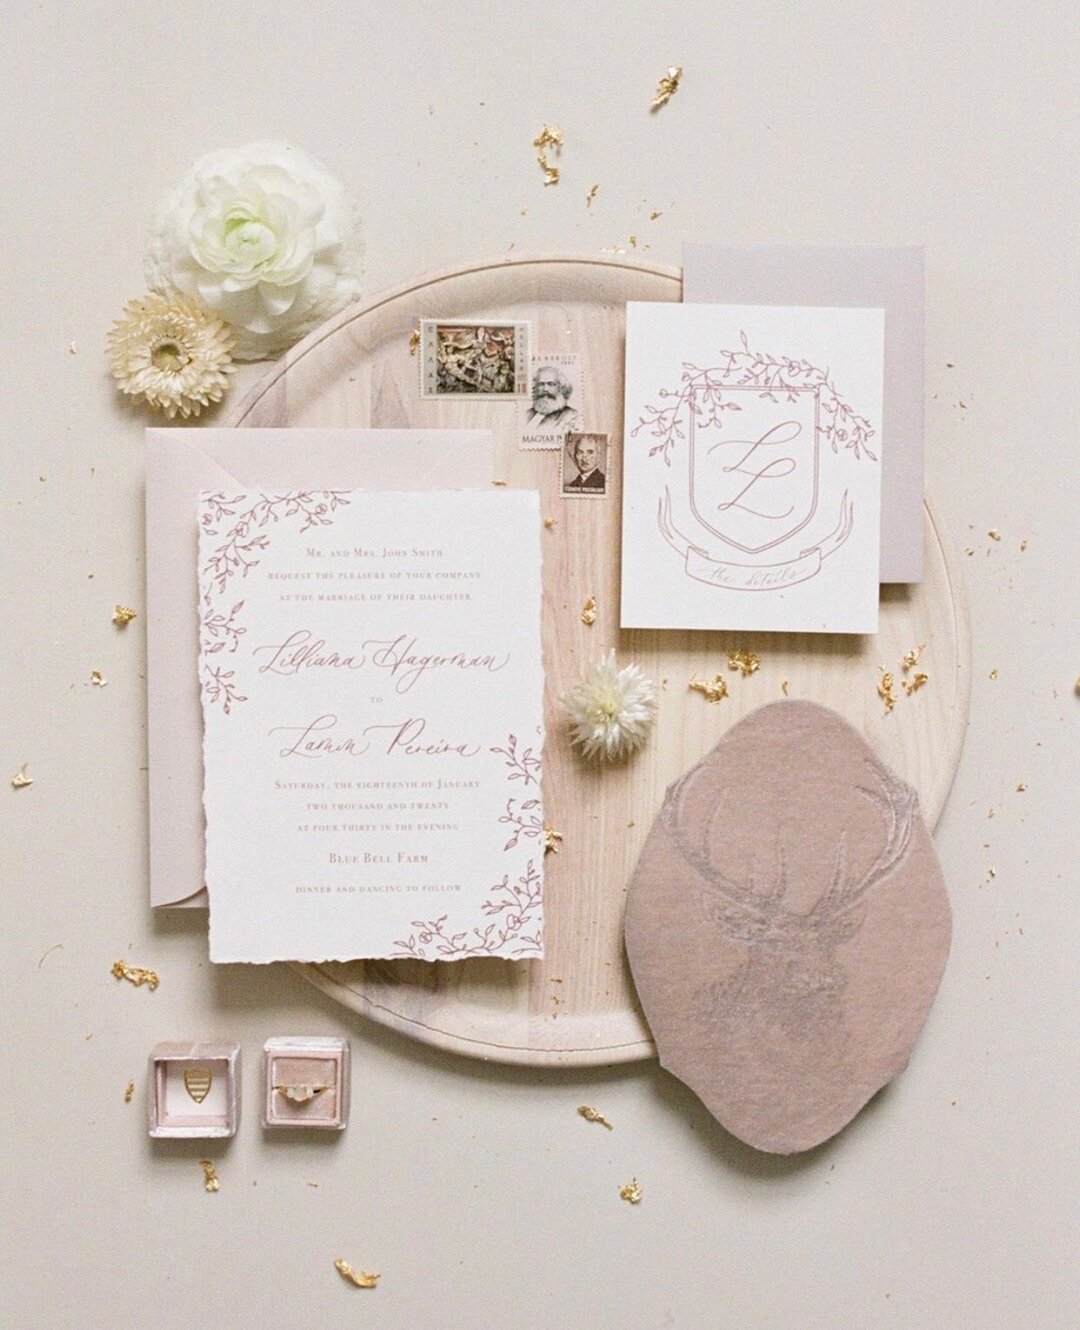 We love the way that our stag head print was integrated into this light color palette!⠀⠀⠀⠀⠀⠀⠀⠀⠀
⠀⠀⠀⠀⠀⠀⠀⠀⠀
Our &ldquo;Stag&rdquo; card works for any and all occasions, trust us. ✨ As seen in @trendybride⠀⠀⠀⠀⠀⠀⠀⠀⠀
⠀⠀⠀⠀⠀⠀⠀⠀⠀
⠀⠀⠀⠀⠀⠀⠀⠀⠀
Vendor Credits: ⠀⠀